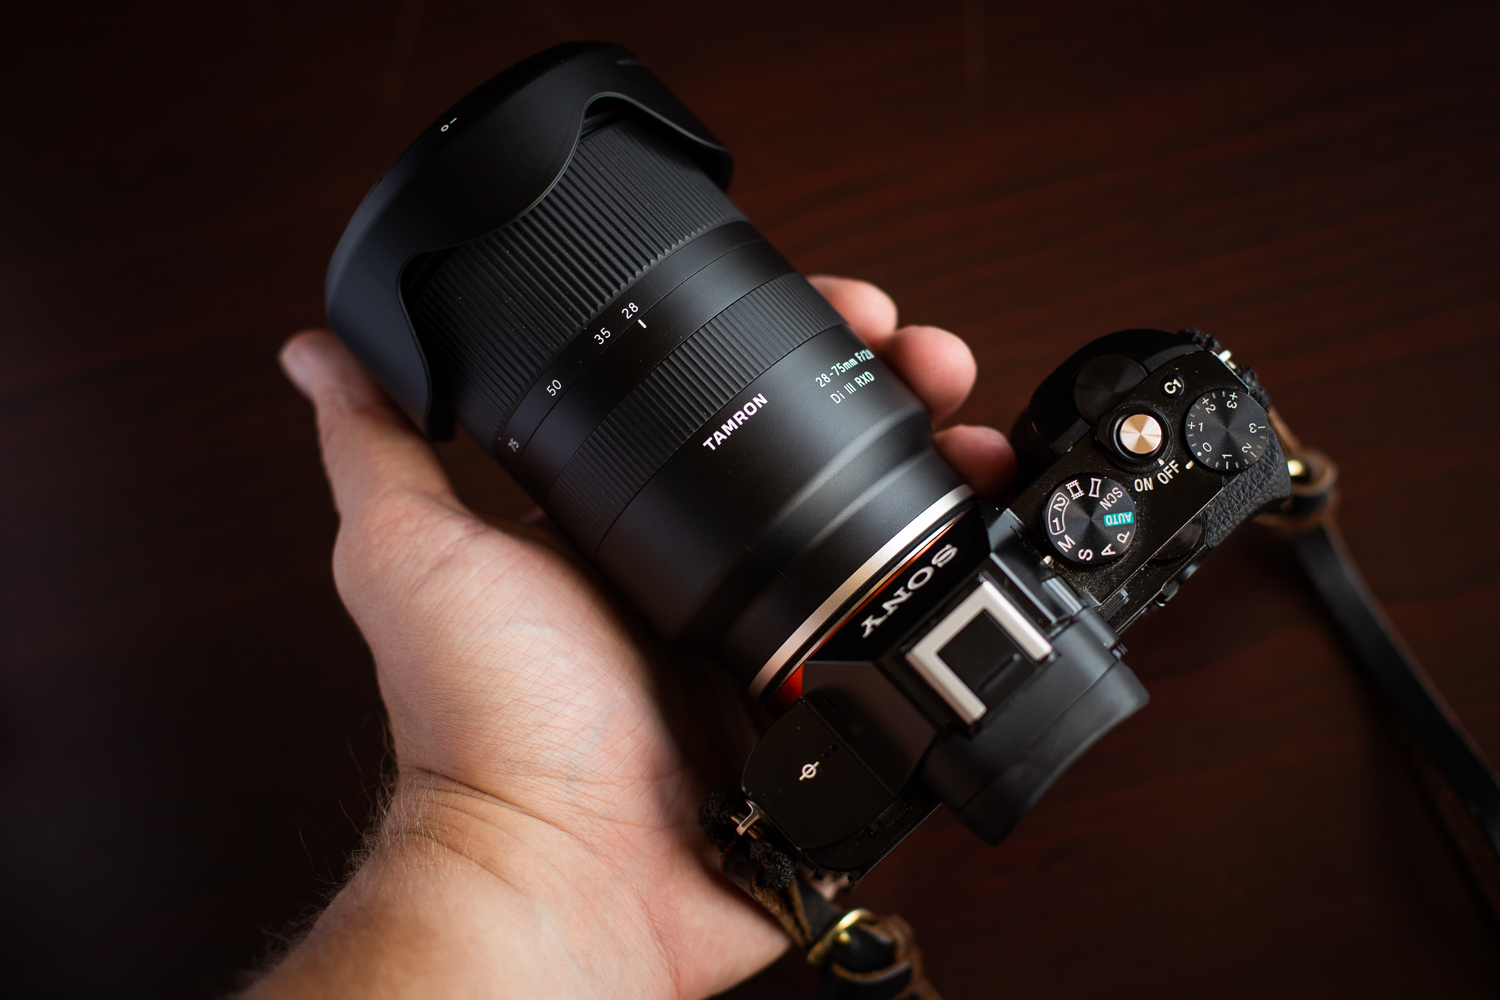 Review: Tamron 28-75mm f2.8 Di III RXD (Sony FE)